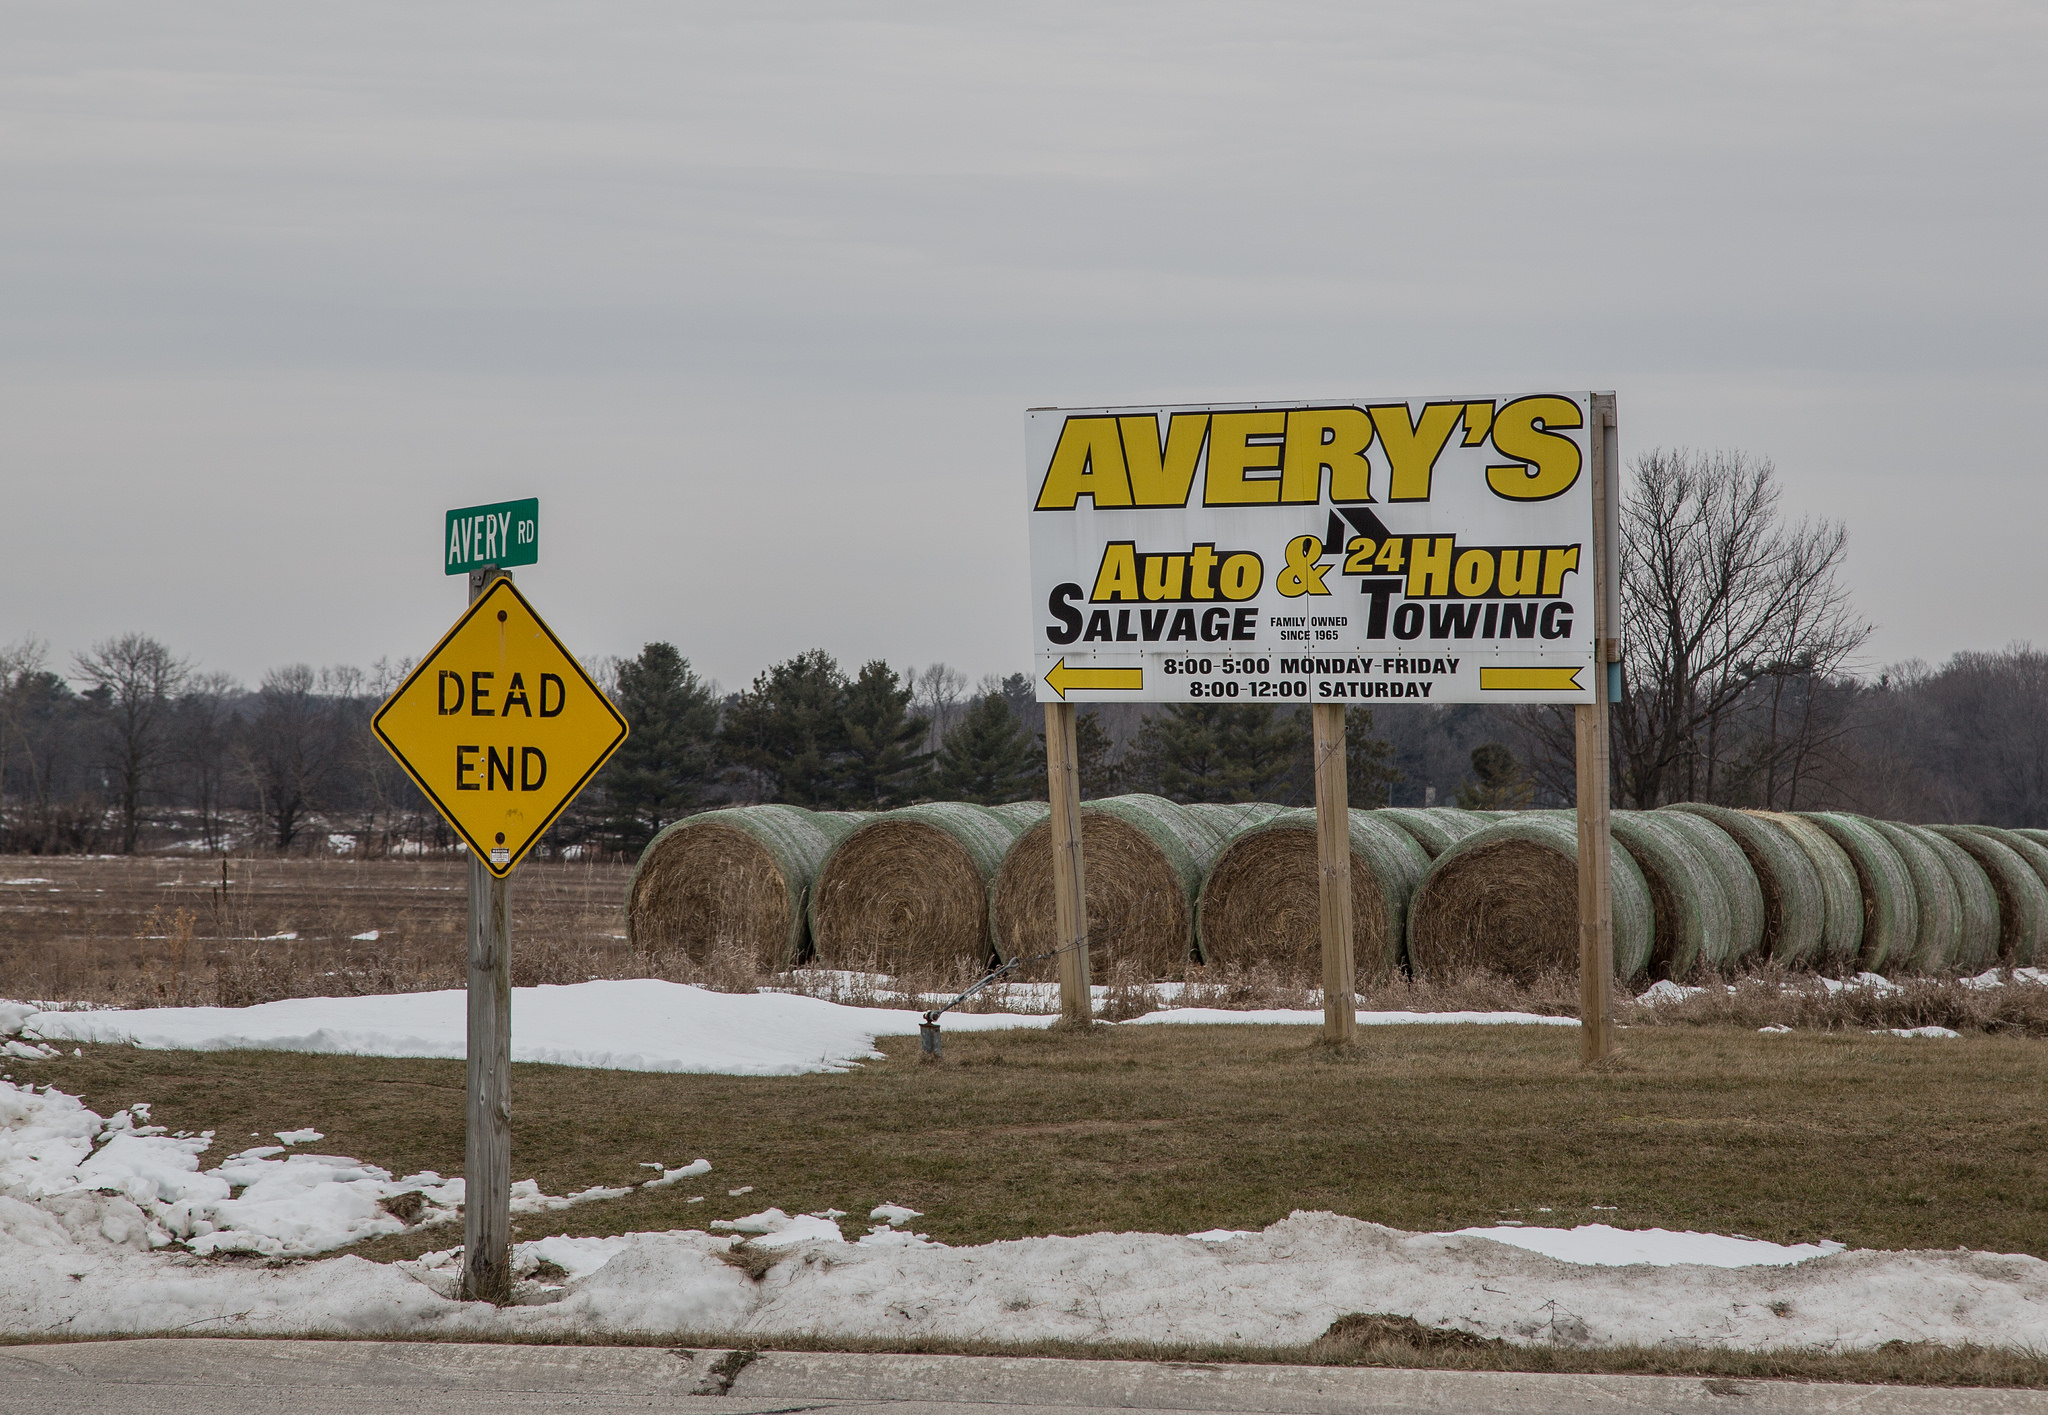 Photograph of a billboard that says Avery's Auto Salvage and 24-Hour Towing